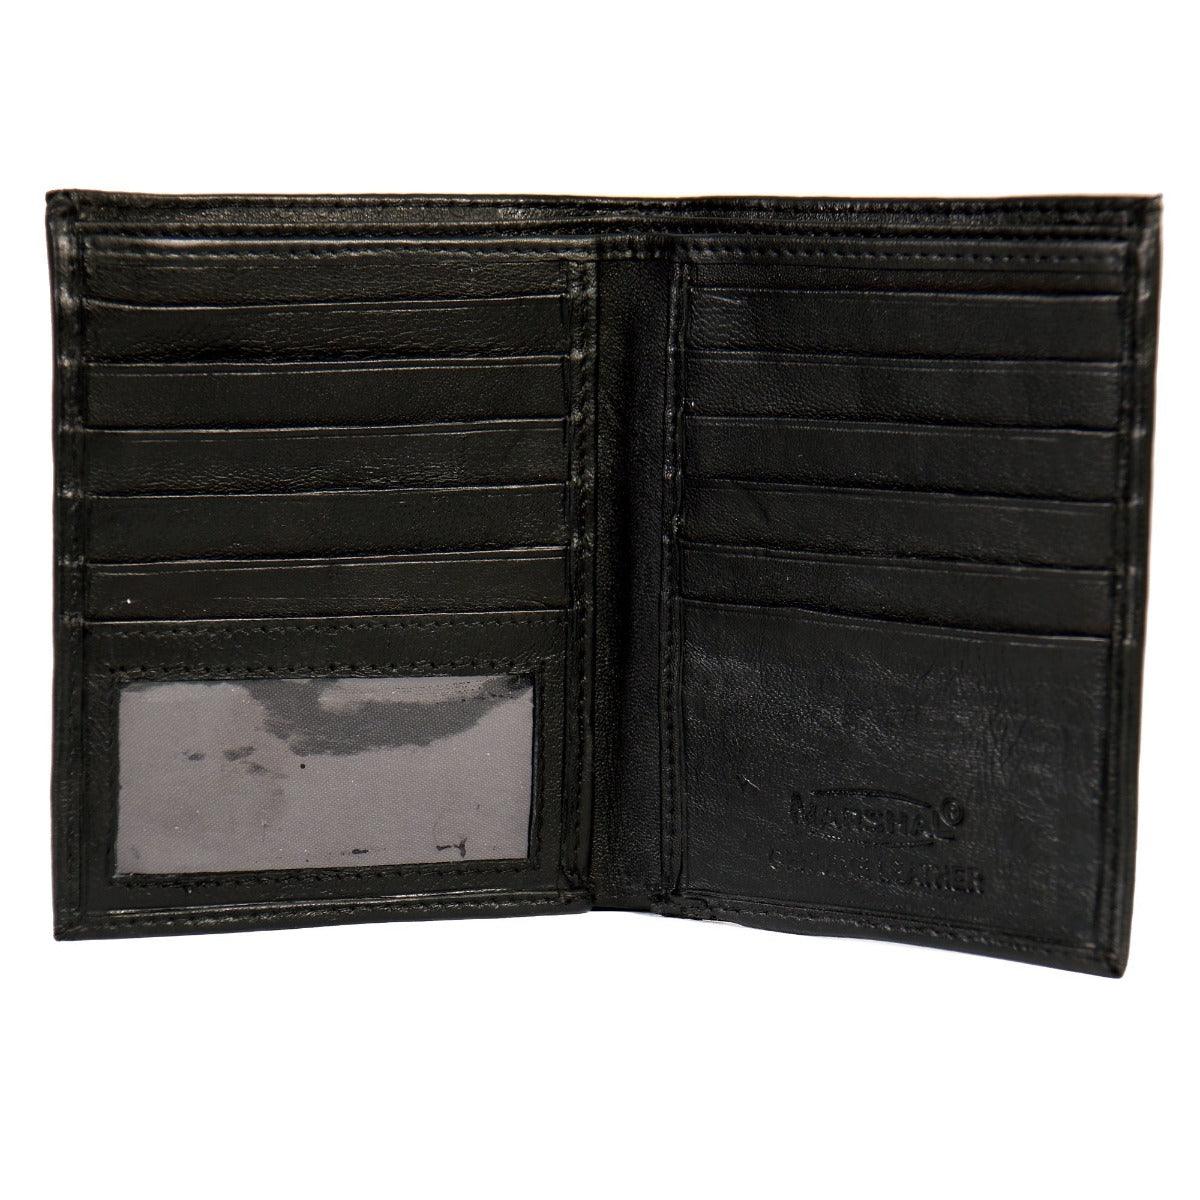 Hot Leathers Bifold Rfid Blocking Wallet With Zipper Pocket - American Legend Rider